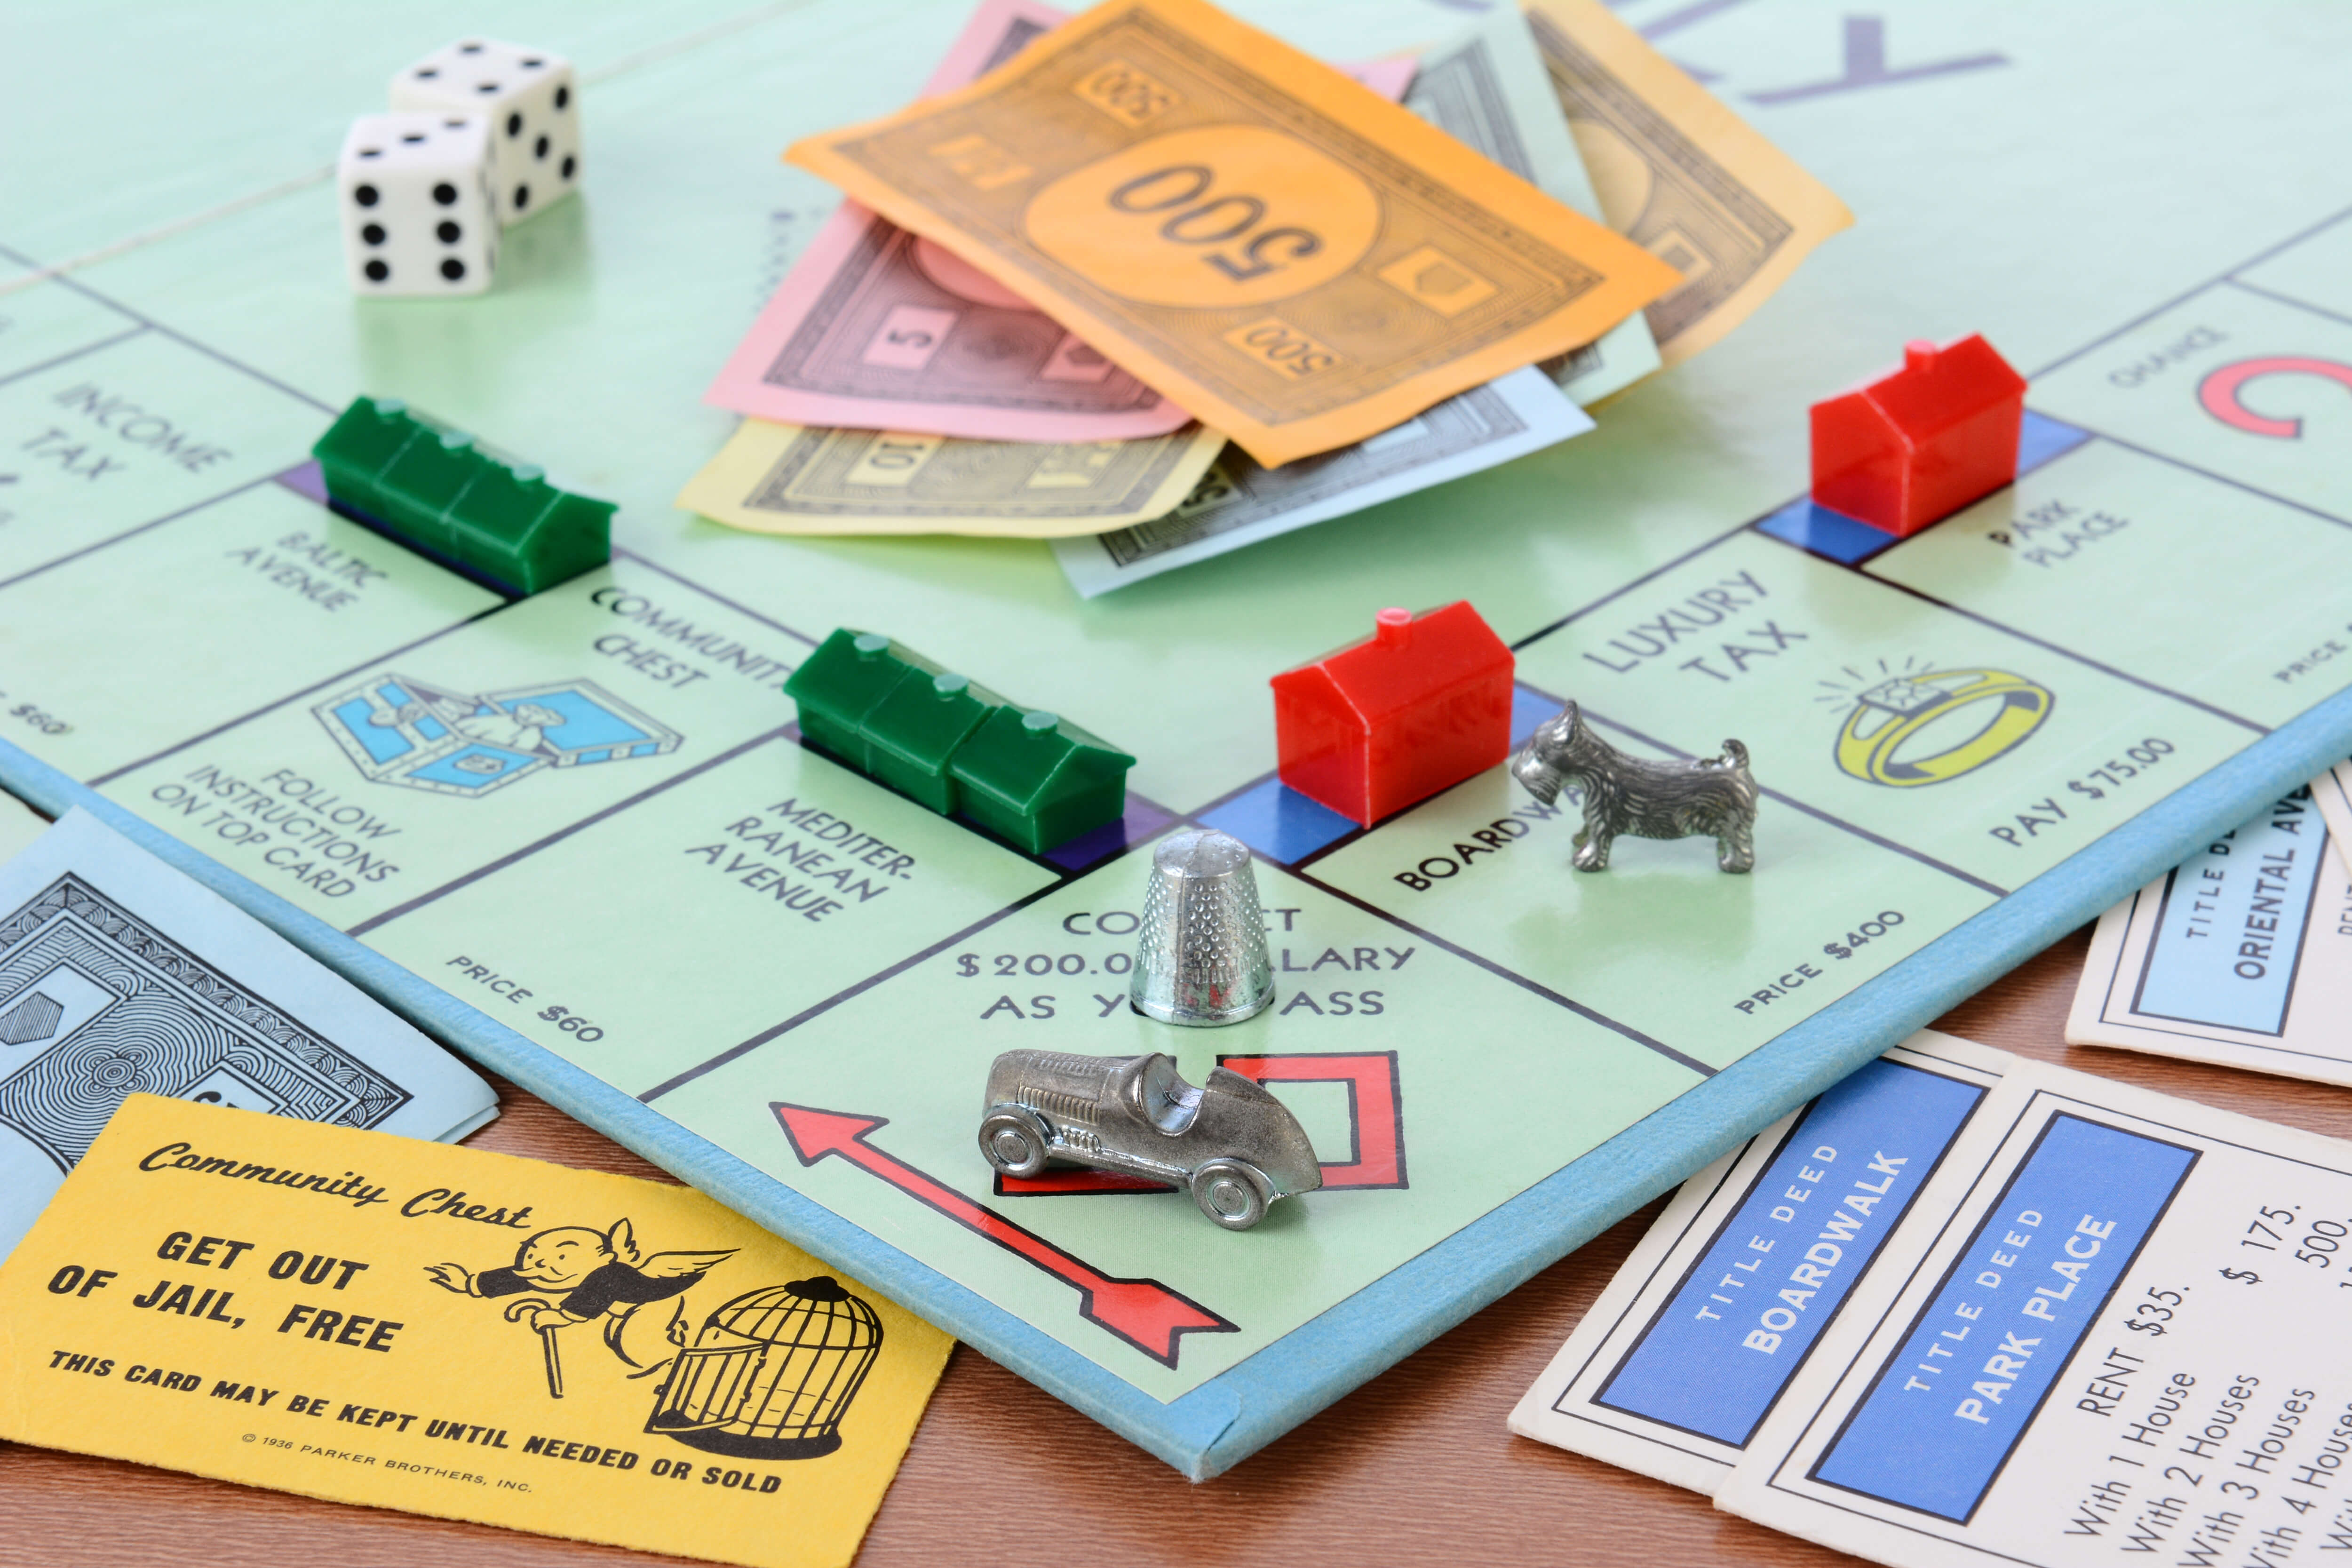 Today in Crypto: New Monopoly Edition to Showcase Crypto, Tokens.com Launches Customized Multiplayer Game in Fortnite for Sleep Tech Company